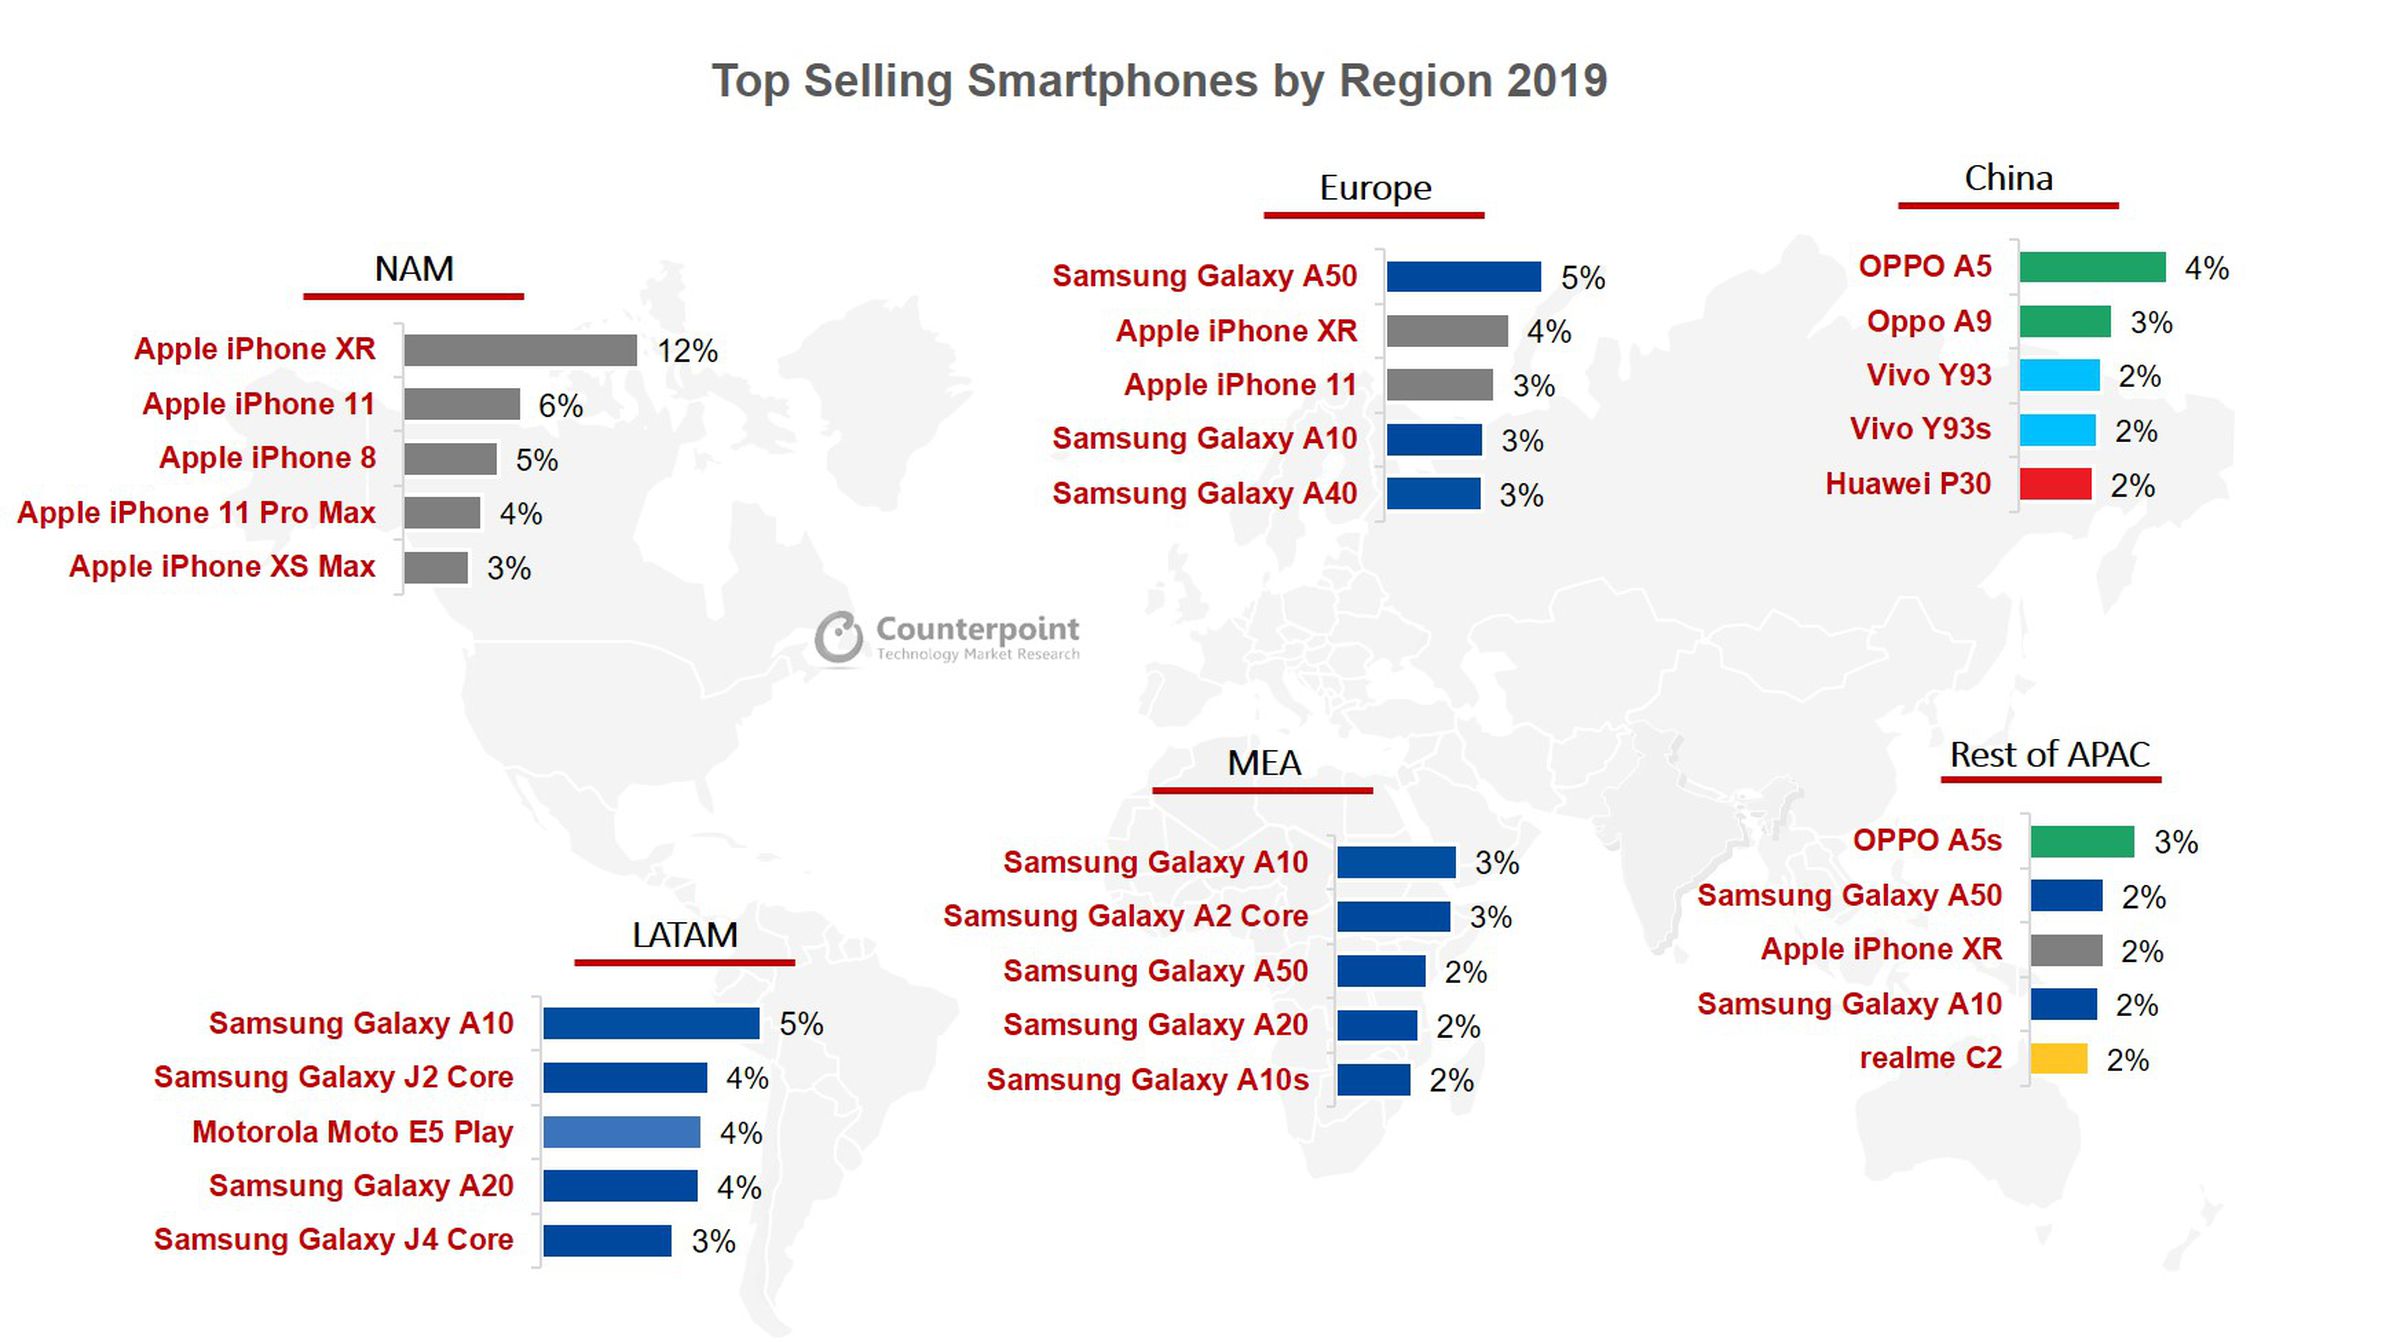 Apple’s phones dominated the top five in North America, while Samsung took three of the top spots in Europe.